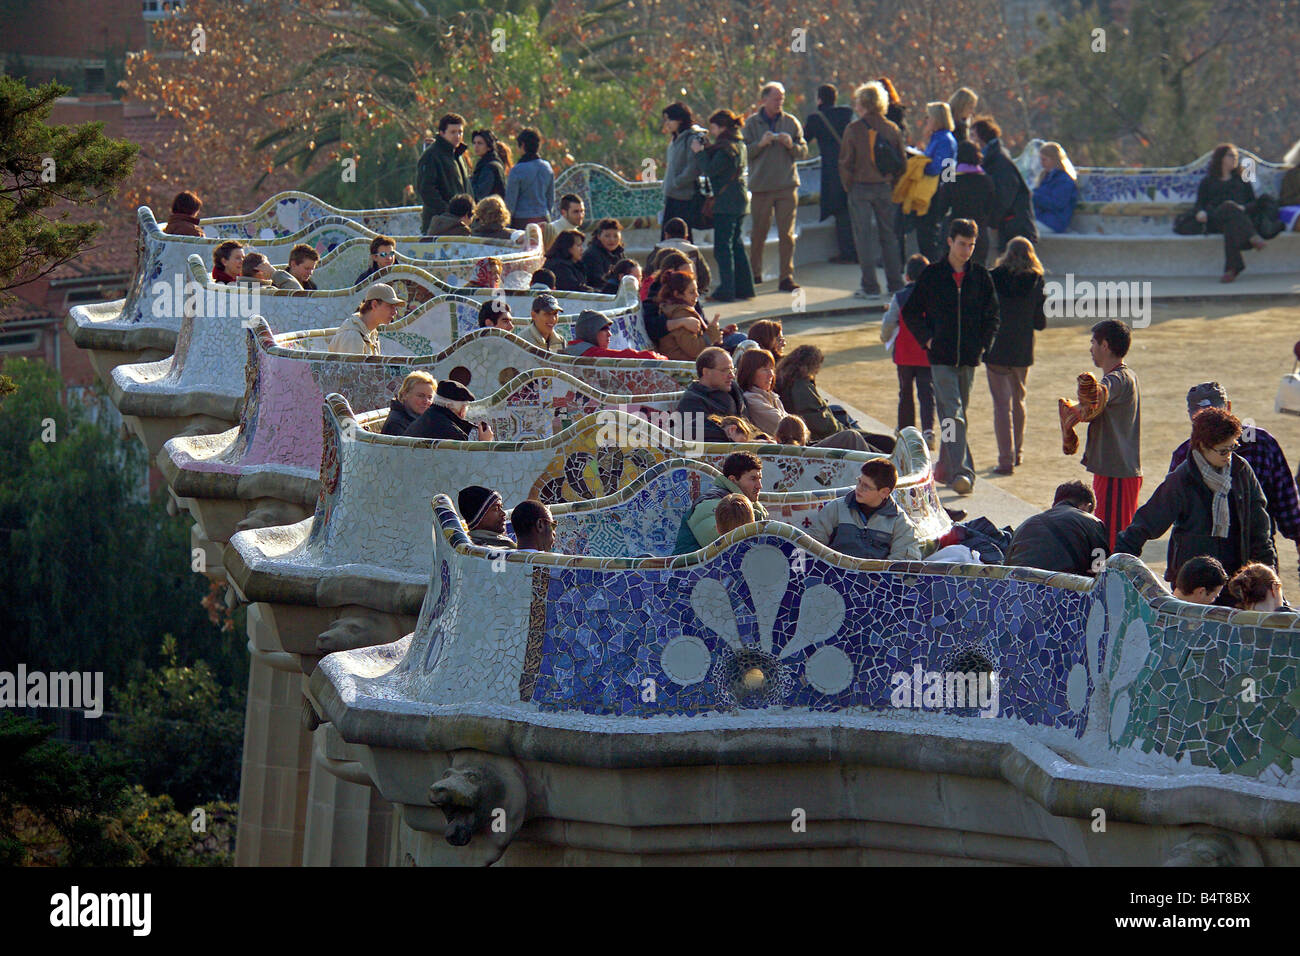 People enjoying the sunshine at Park Guell in Barcleona and showing the mosaic work on the seating area of the main terrace. Stock Photo